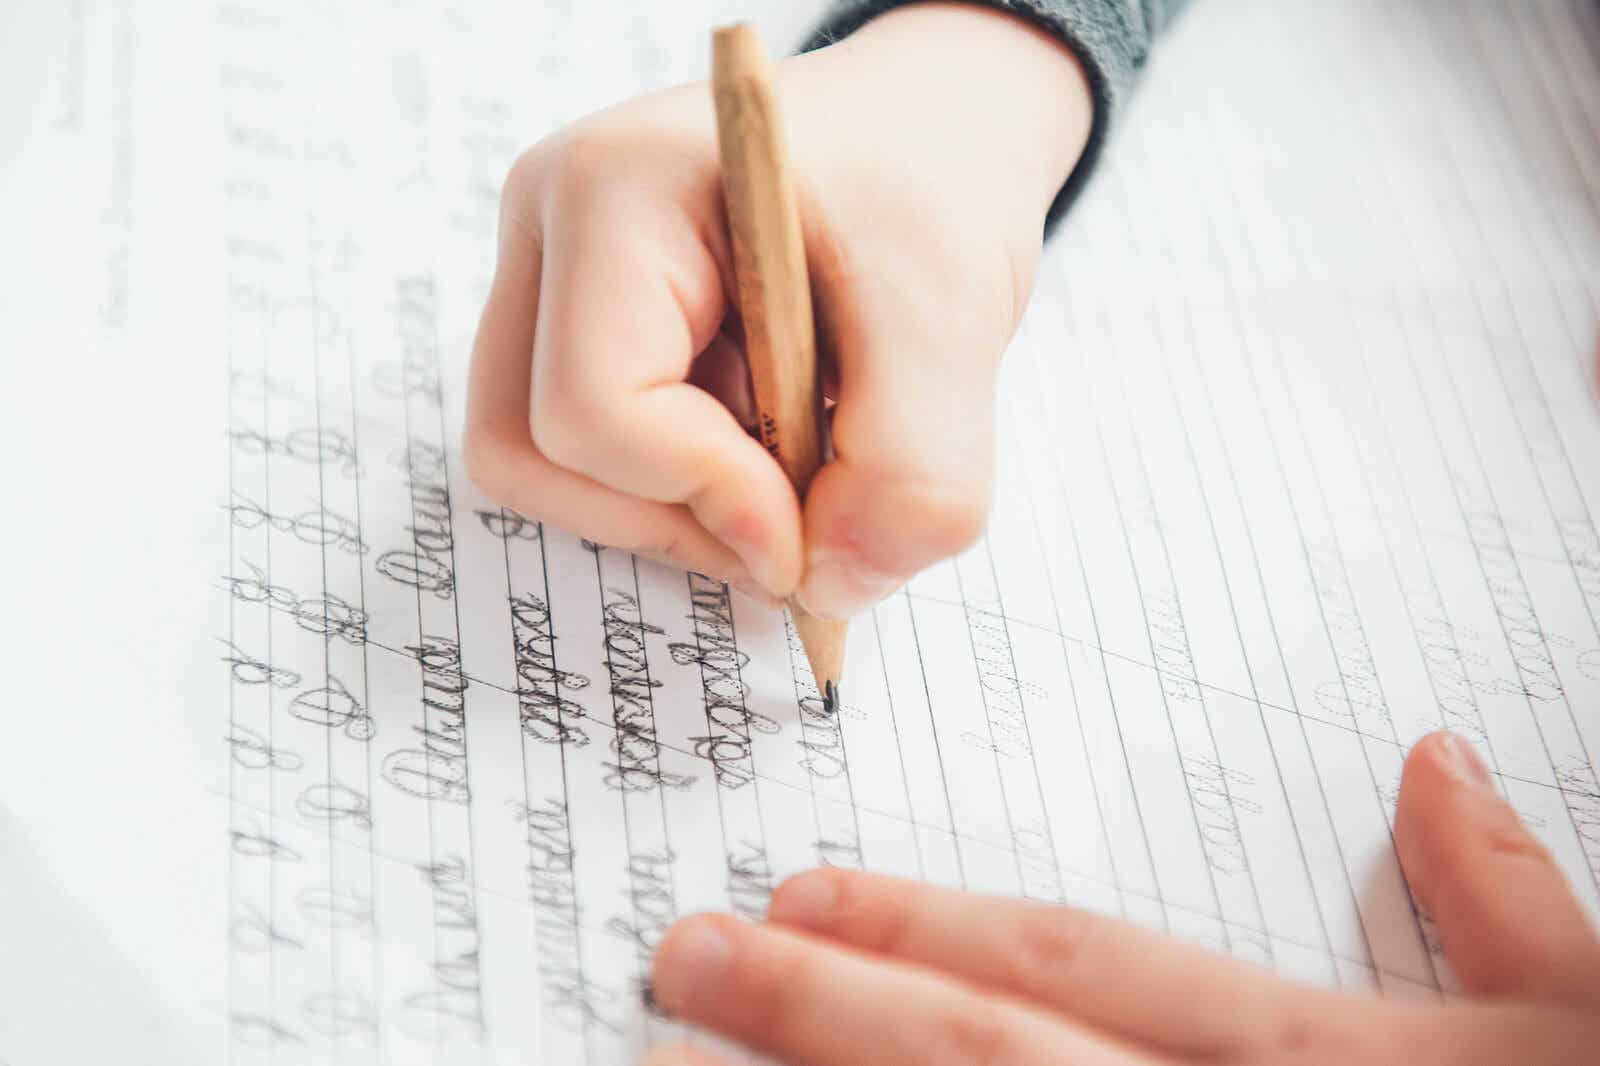 A child practicing his handwriting.